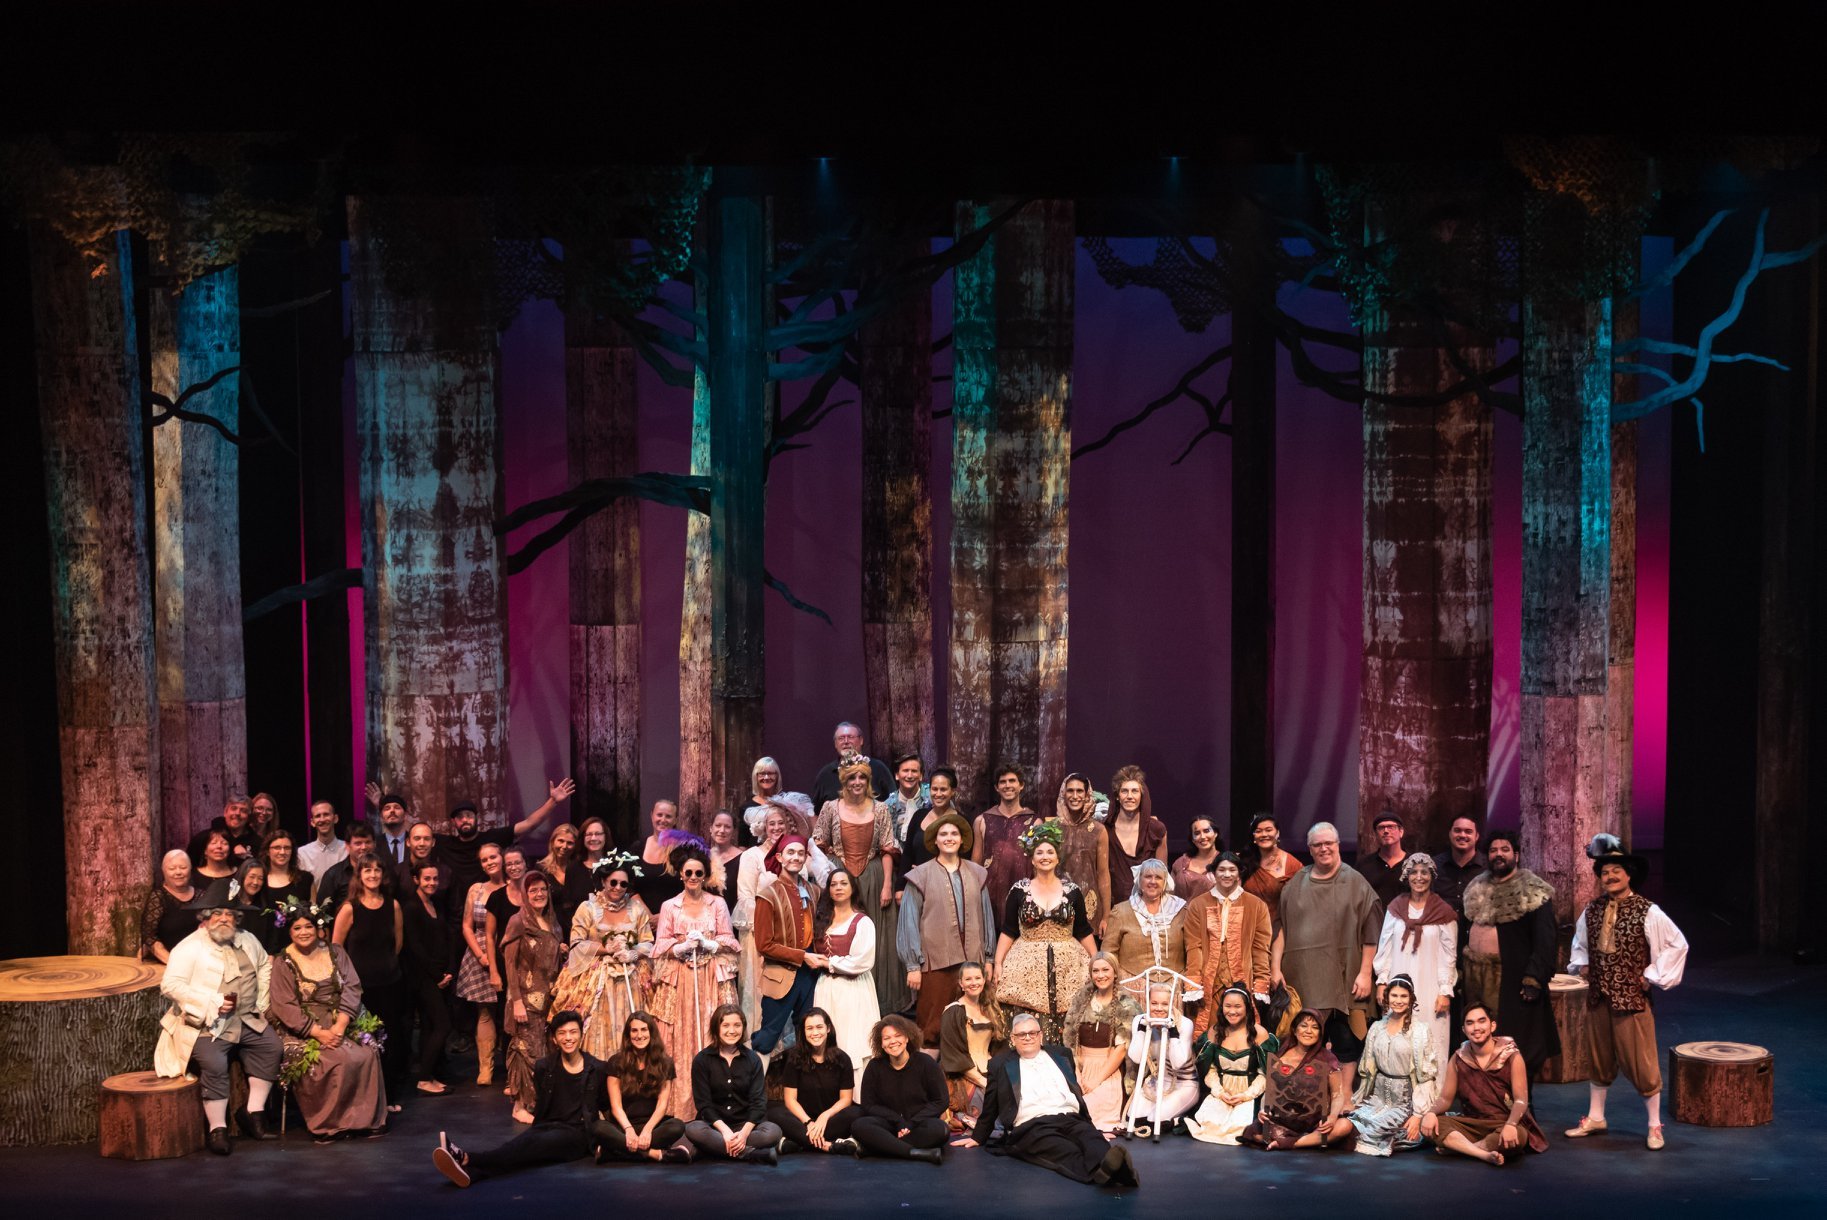 INTO THE WOODS cast photo.jpg